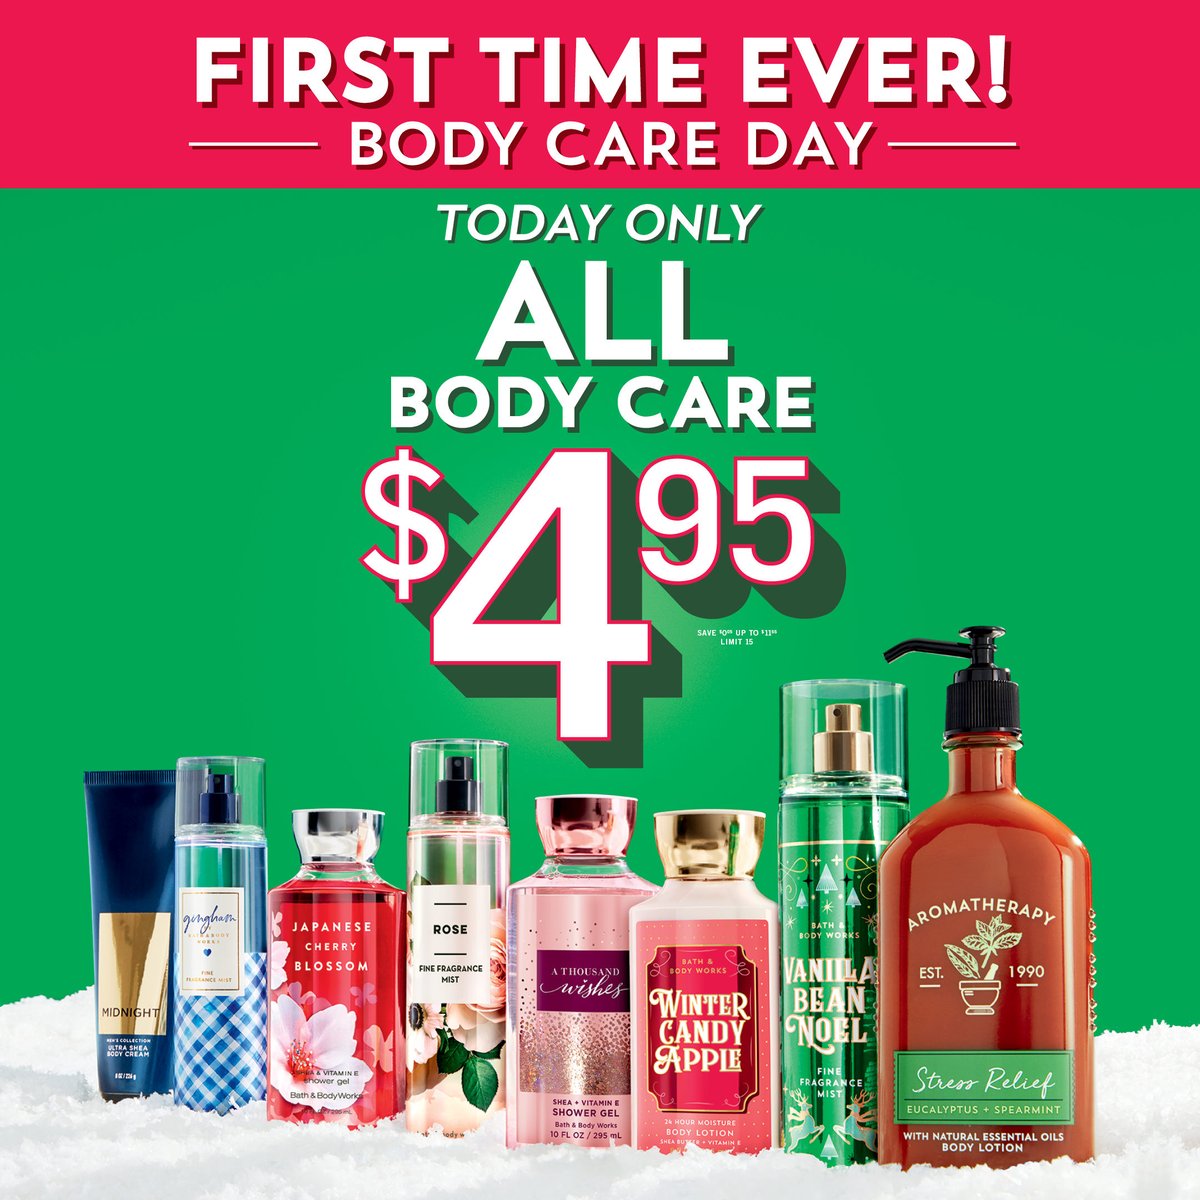 🚨 FIRST TIME EVER ALERT🚨 TODAY ONLY! IN STORES & ONLINE ALL BODY CARE IS $4.95! Choose from... 8️⃣5️⃣ Moisturizers 7️⃣5️⃣ Cleansers 6️⃣0️⃣ Fragrances... including Men's! 1️⃣2️⃣ Aromatherapy Blends Plus 3️⃣ EXCLUSIVE fragrances 🆕 for the day‼